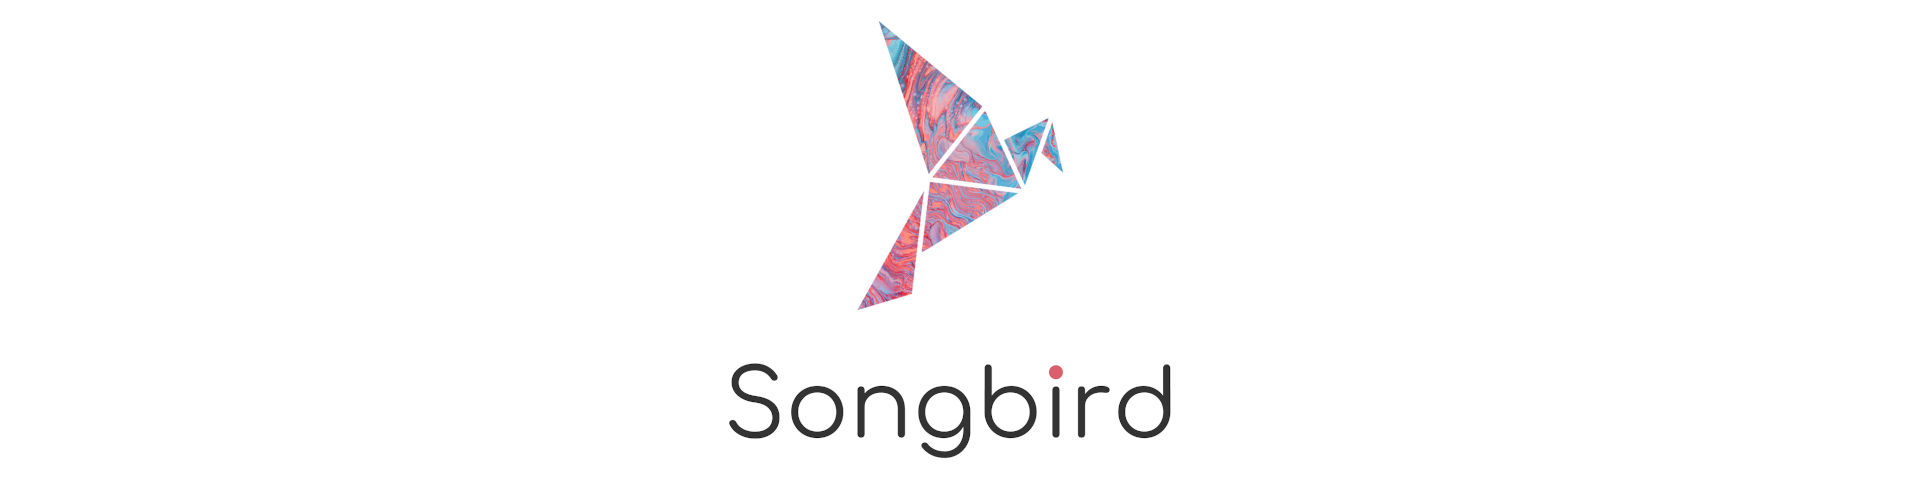 Flare’s Songbird promises another airdrop to XRP holders